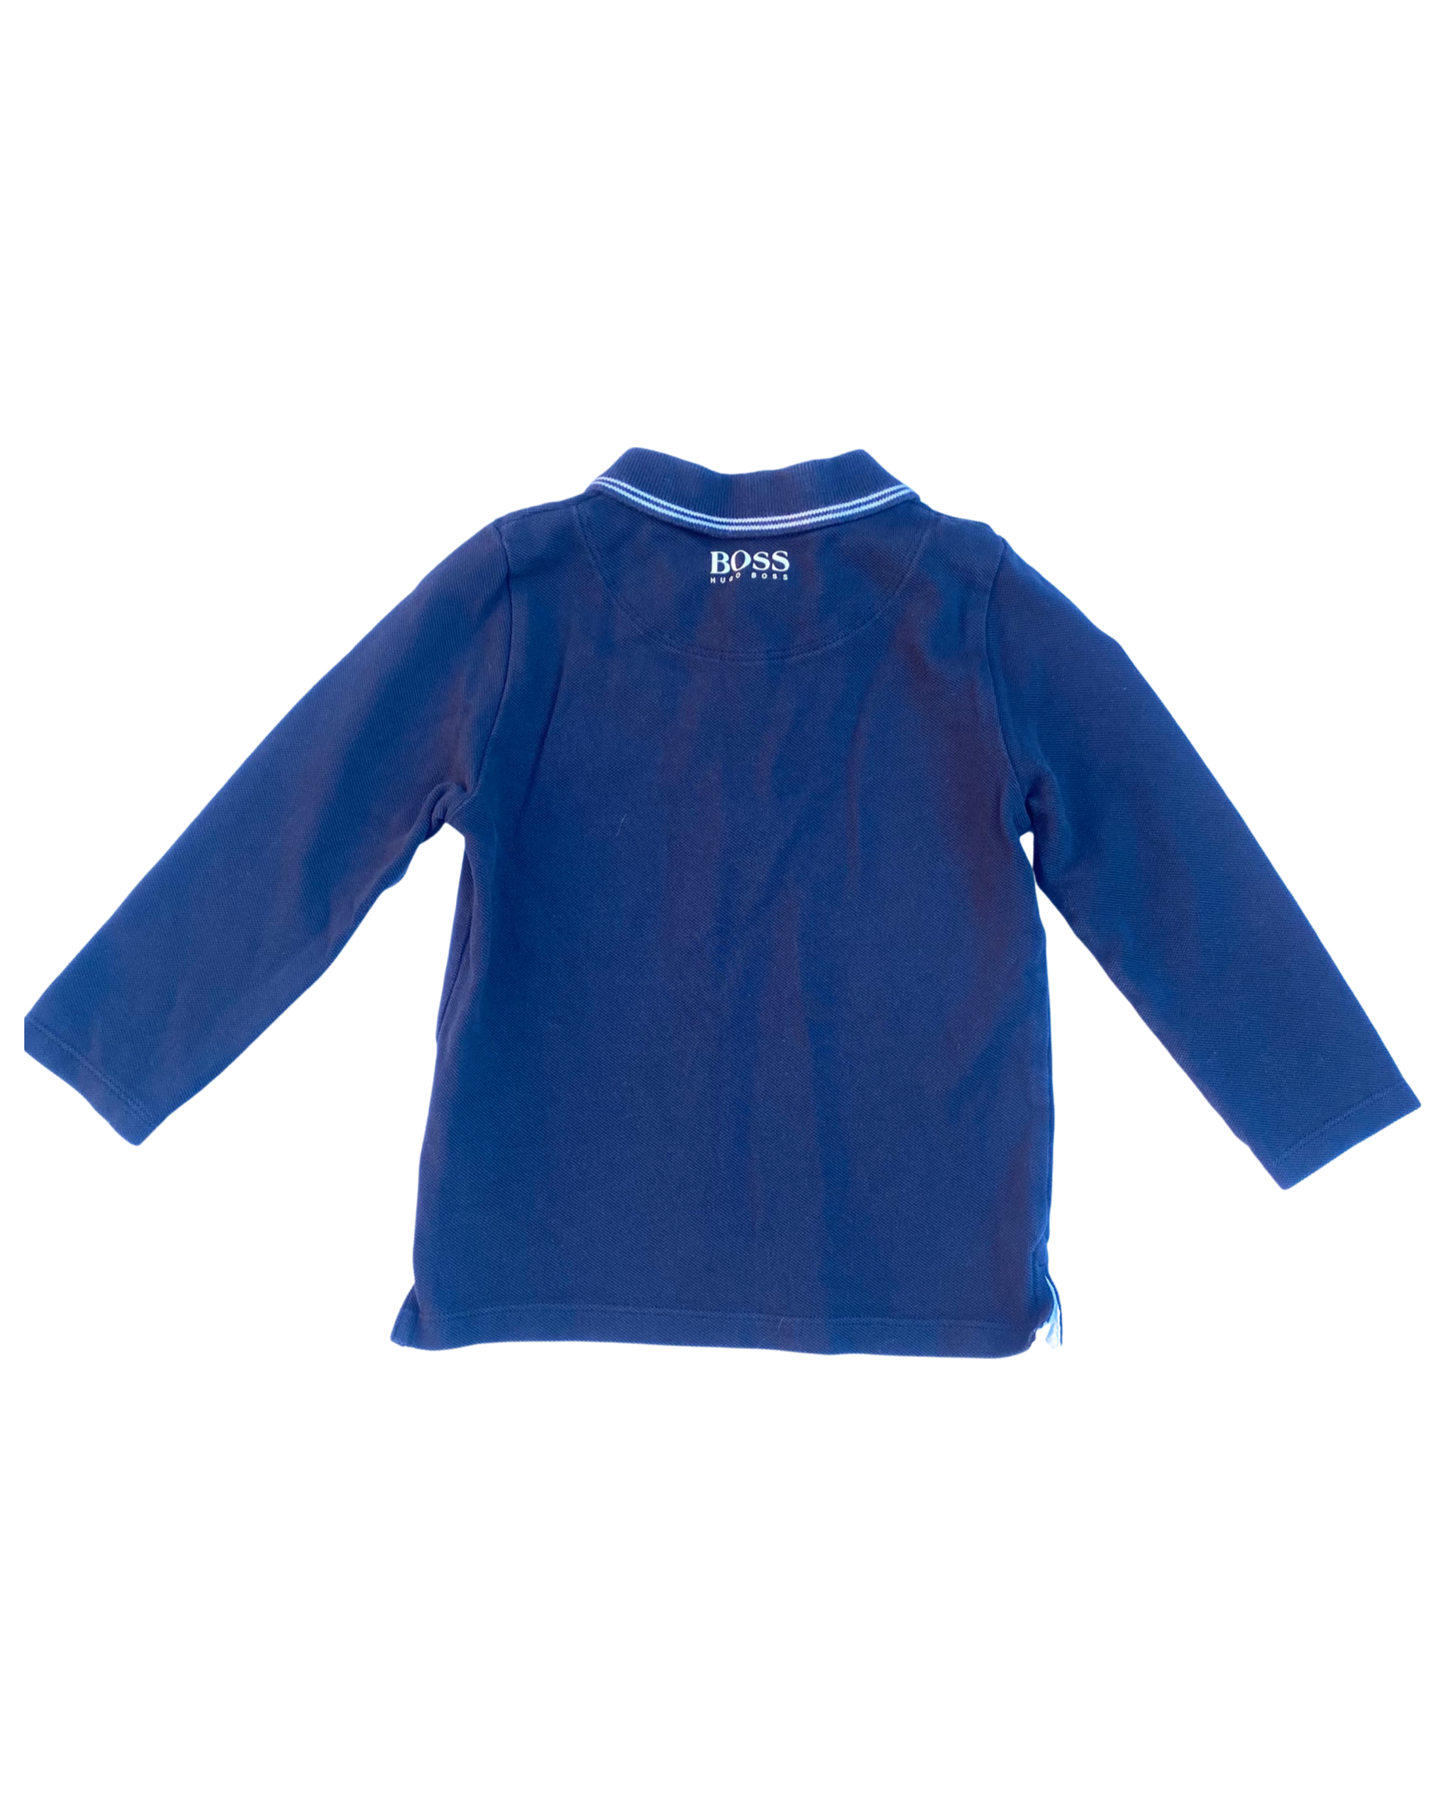 Hugo Boss vintage polo shirt in Navy (size 2-3yrs)